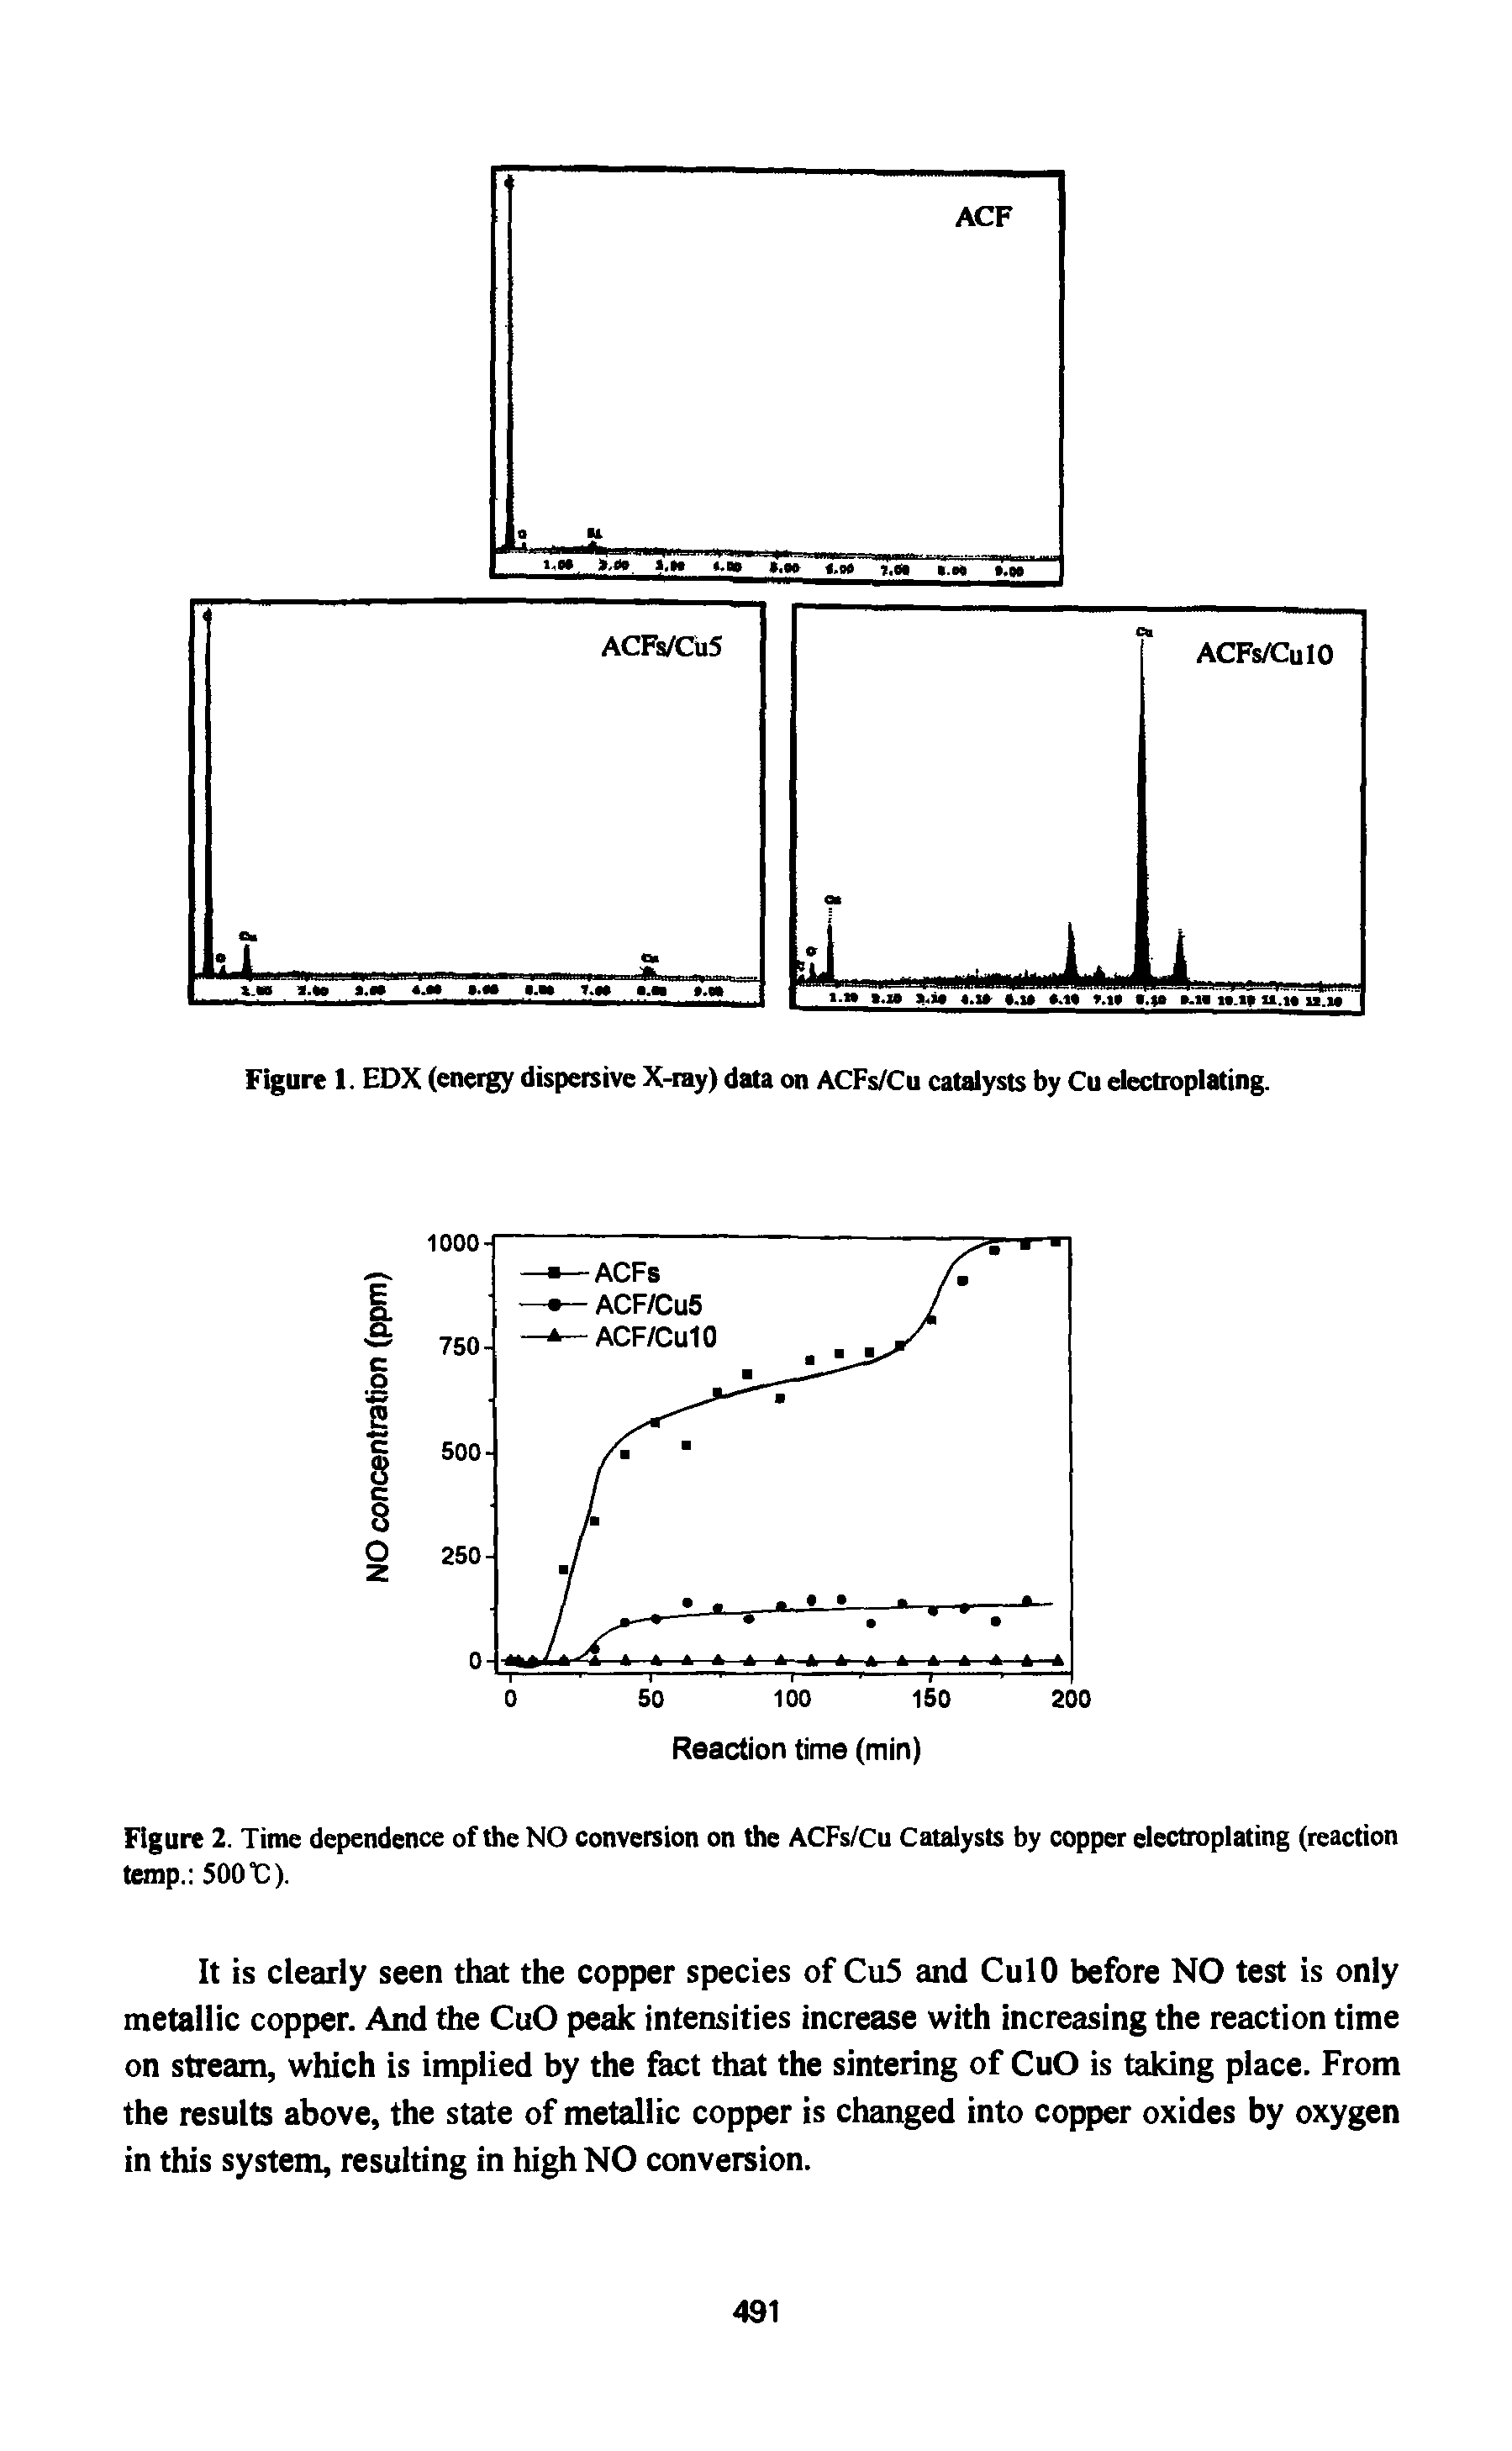 Figure 1. EDX (energy dispersive X-ray) data on ACFs/Cu catalysts by Cu electroplating.